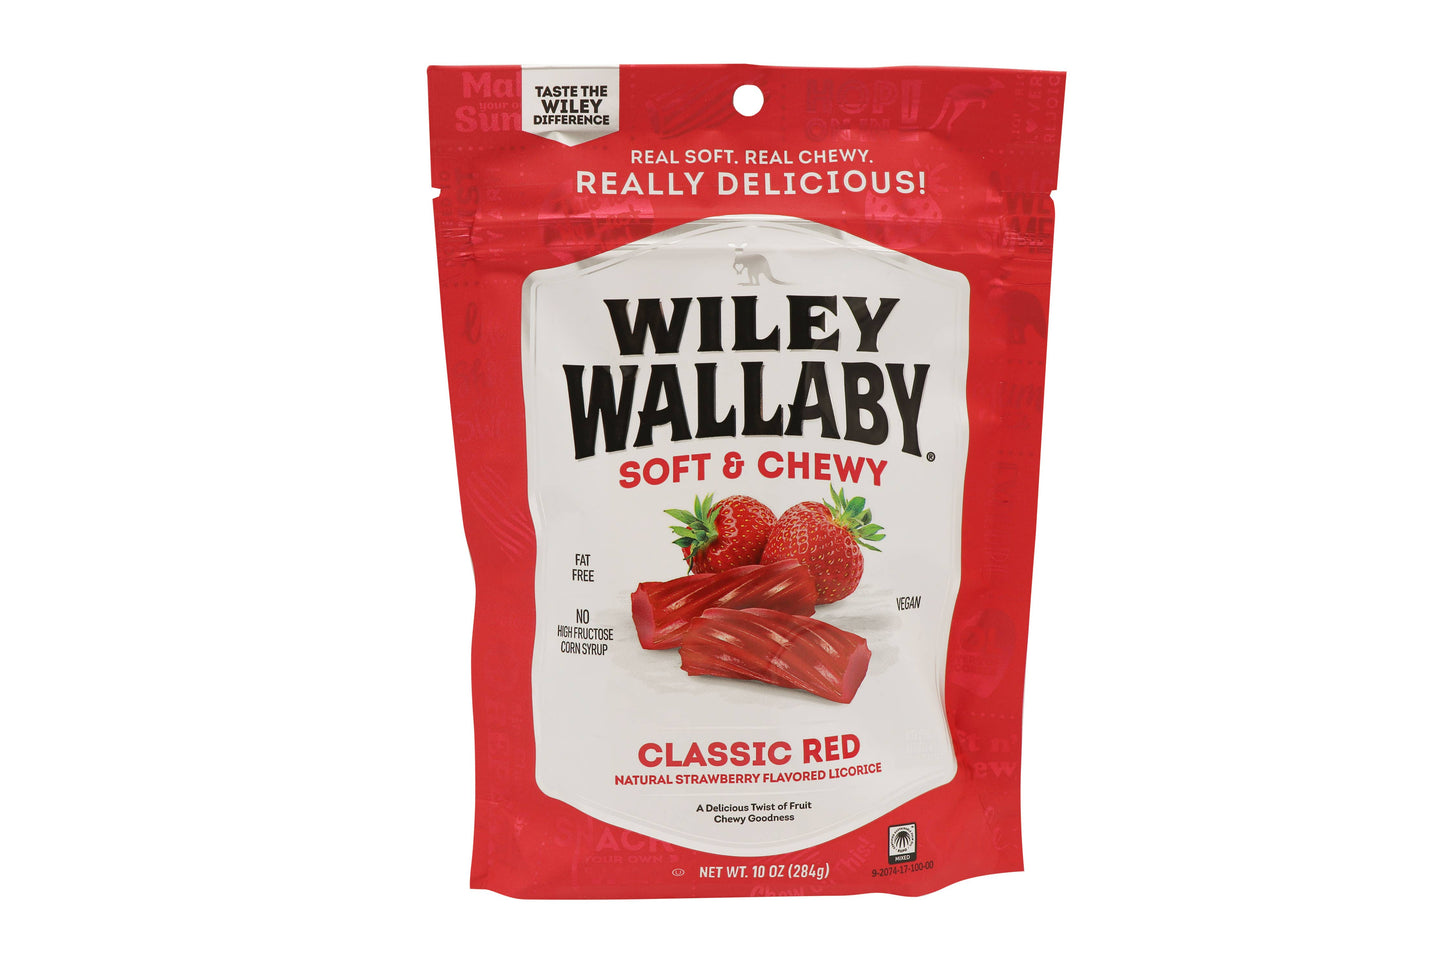 Wiley Wallaby Classic Red Licorice, 10oz Bag, Soft & Chewy